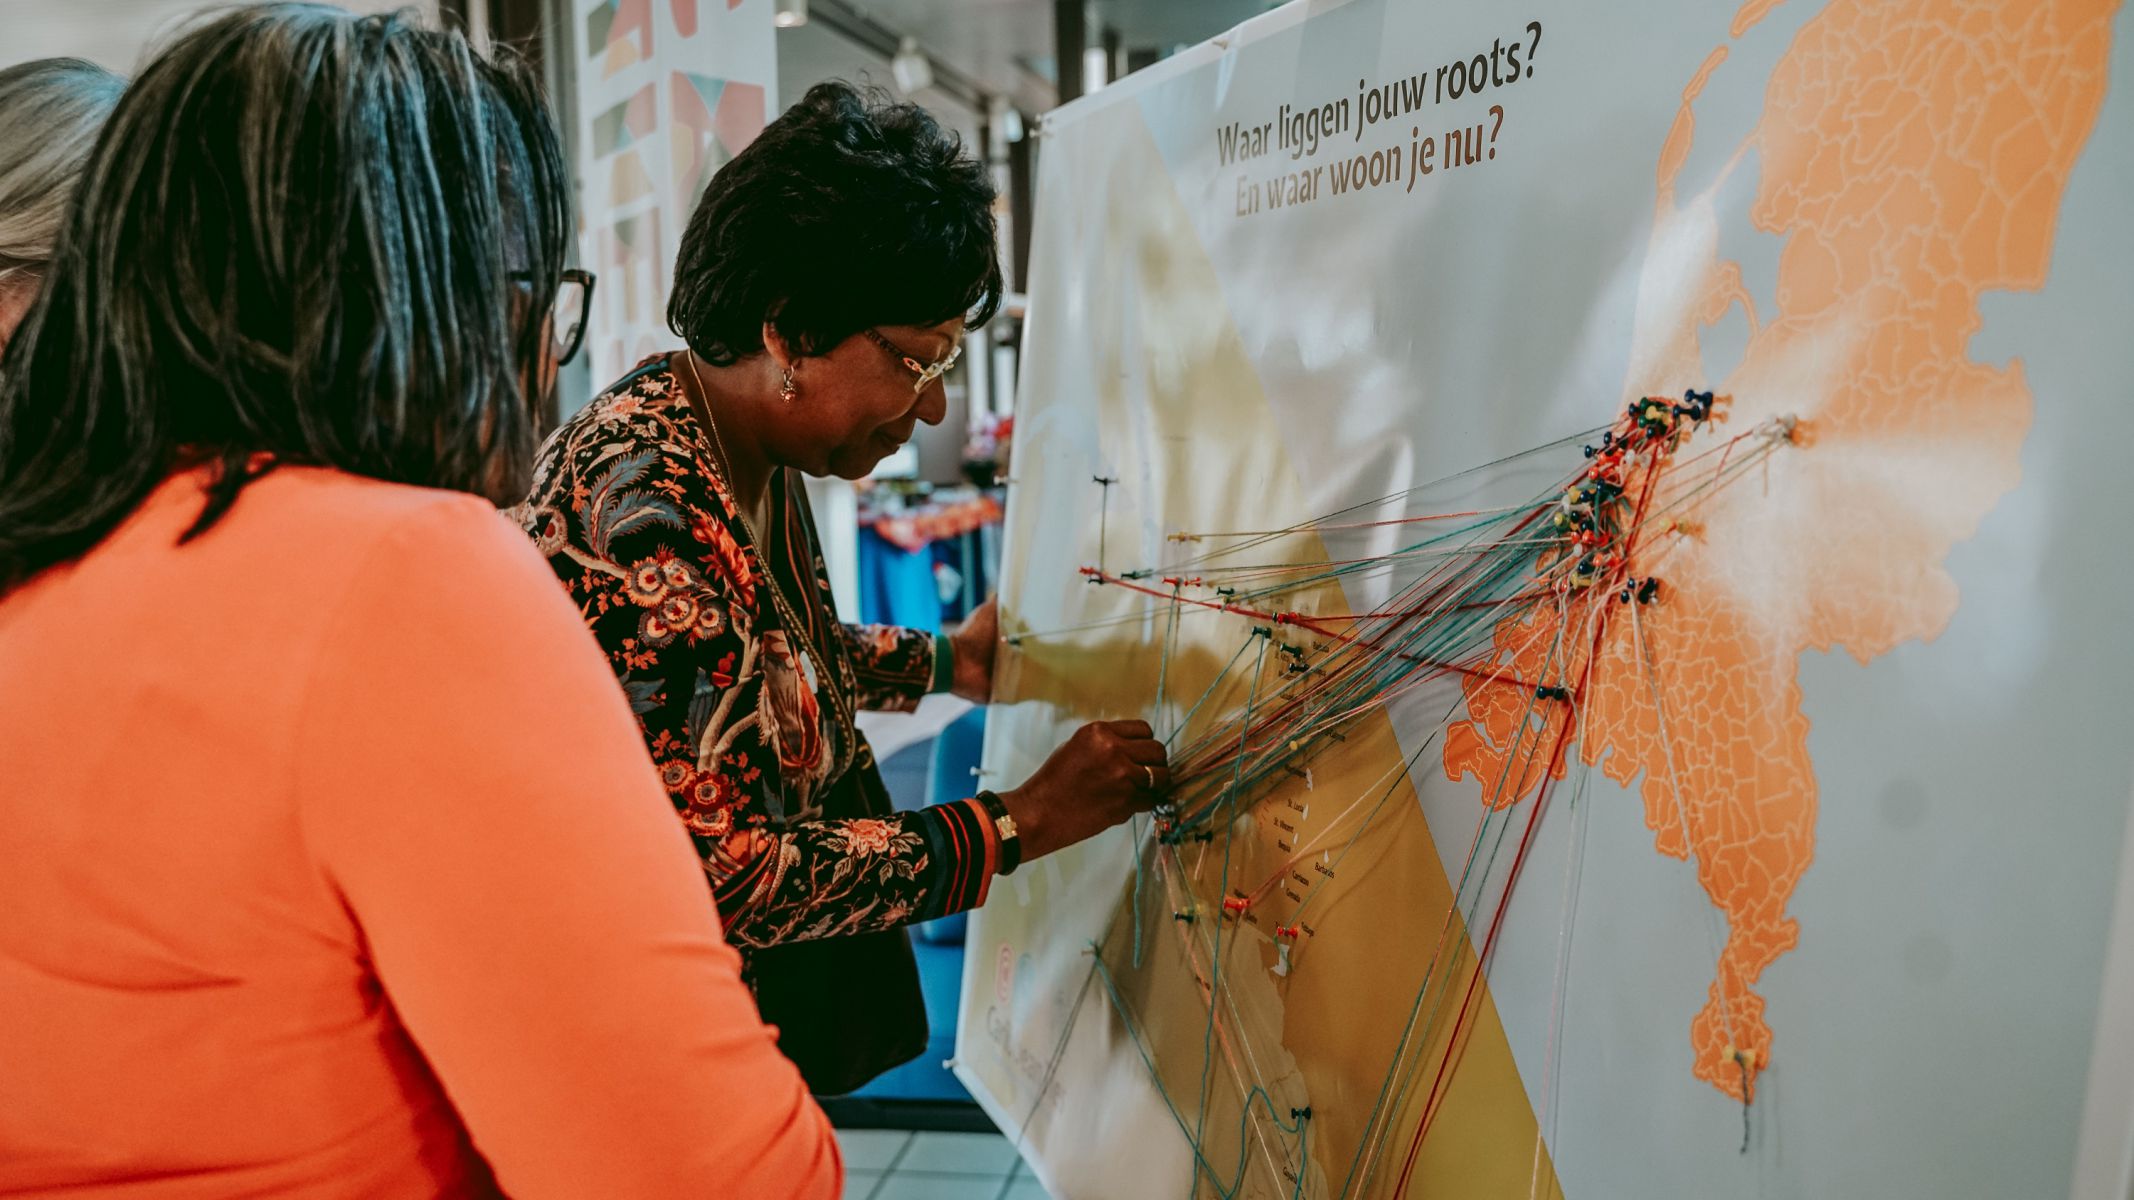 During Caribbean Ties in the Museon, visitors show the link between the Caribbean and the Netherlands. (Photo: Kilian Moesker)